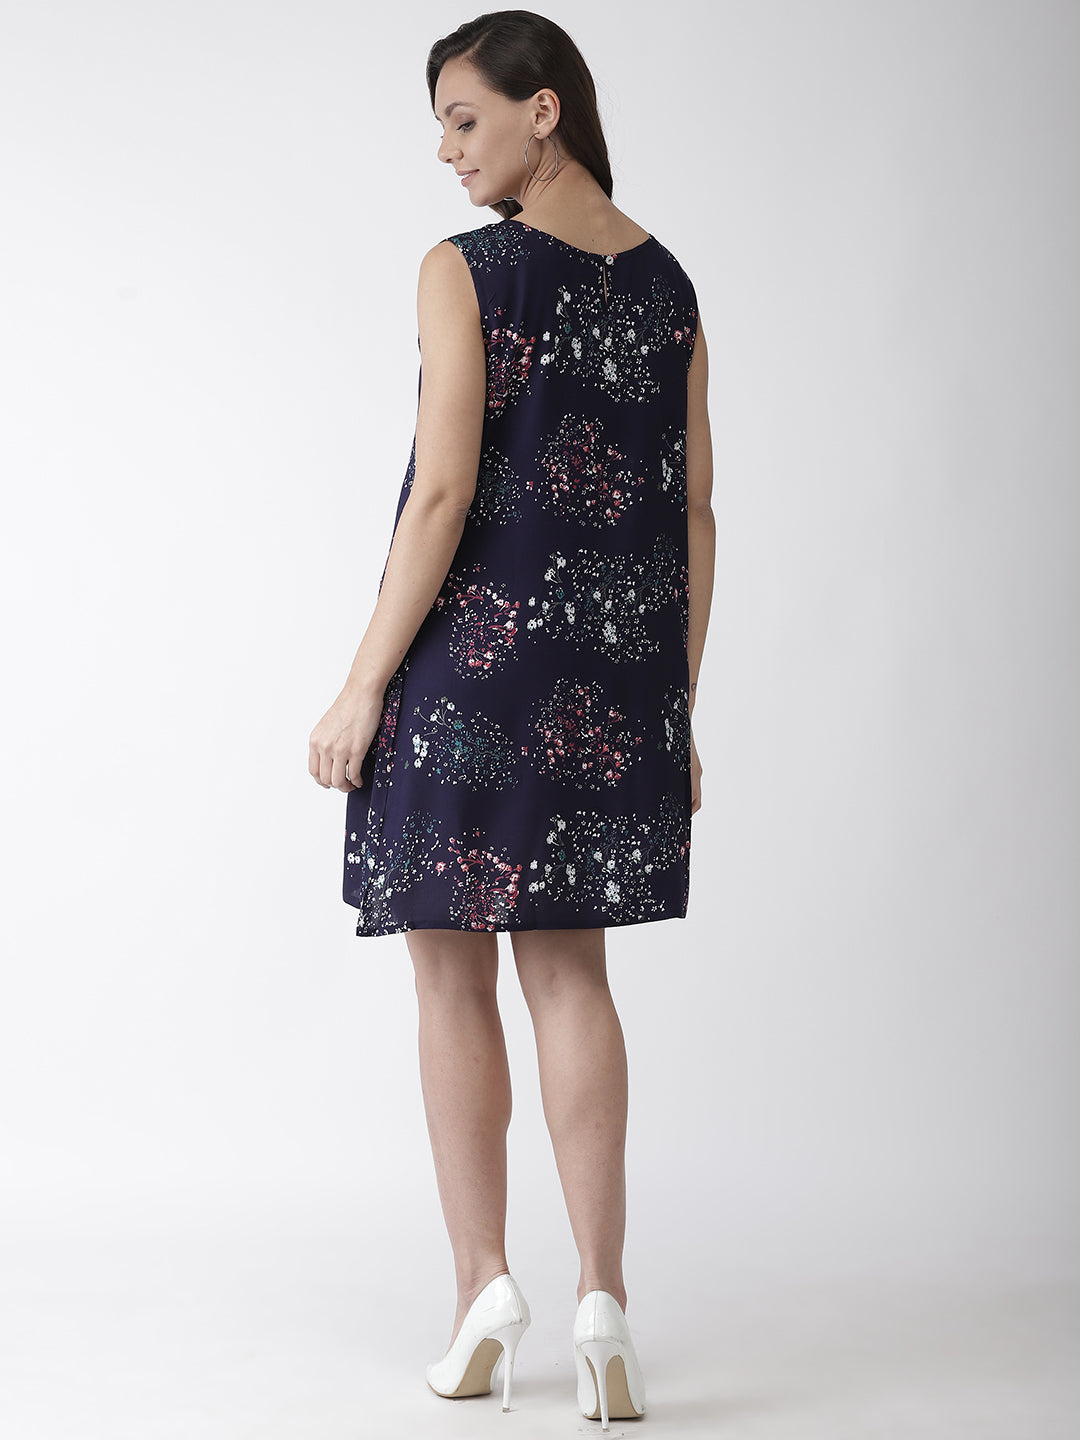 Women Navy Blue & White Floral Printed A-Line Dress